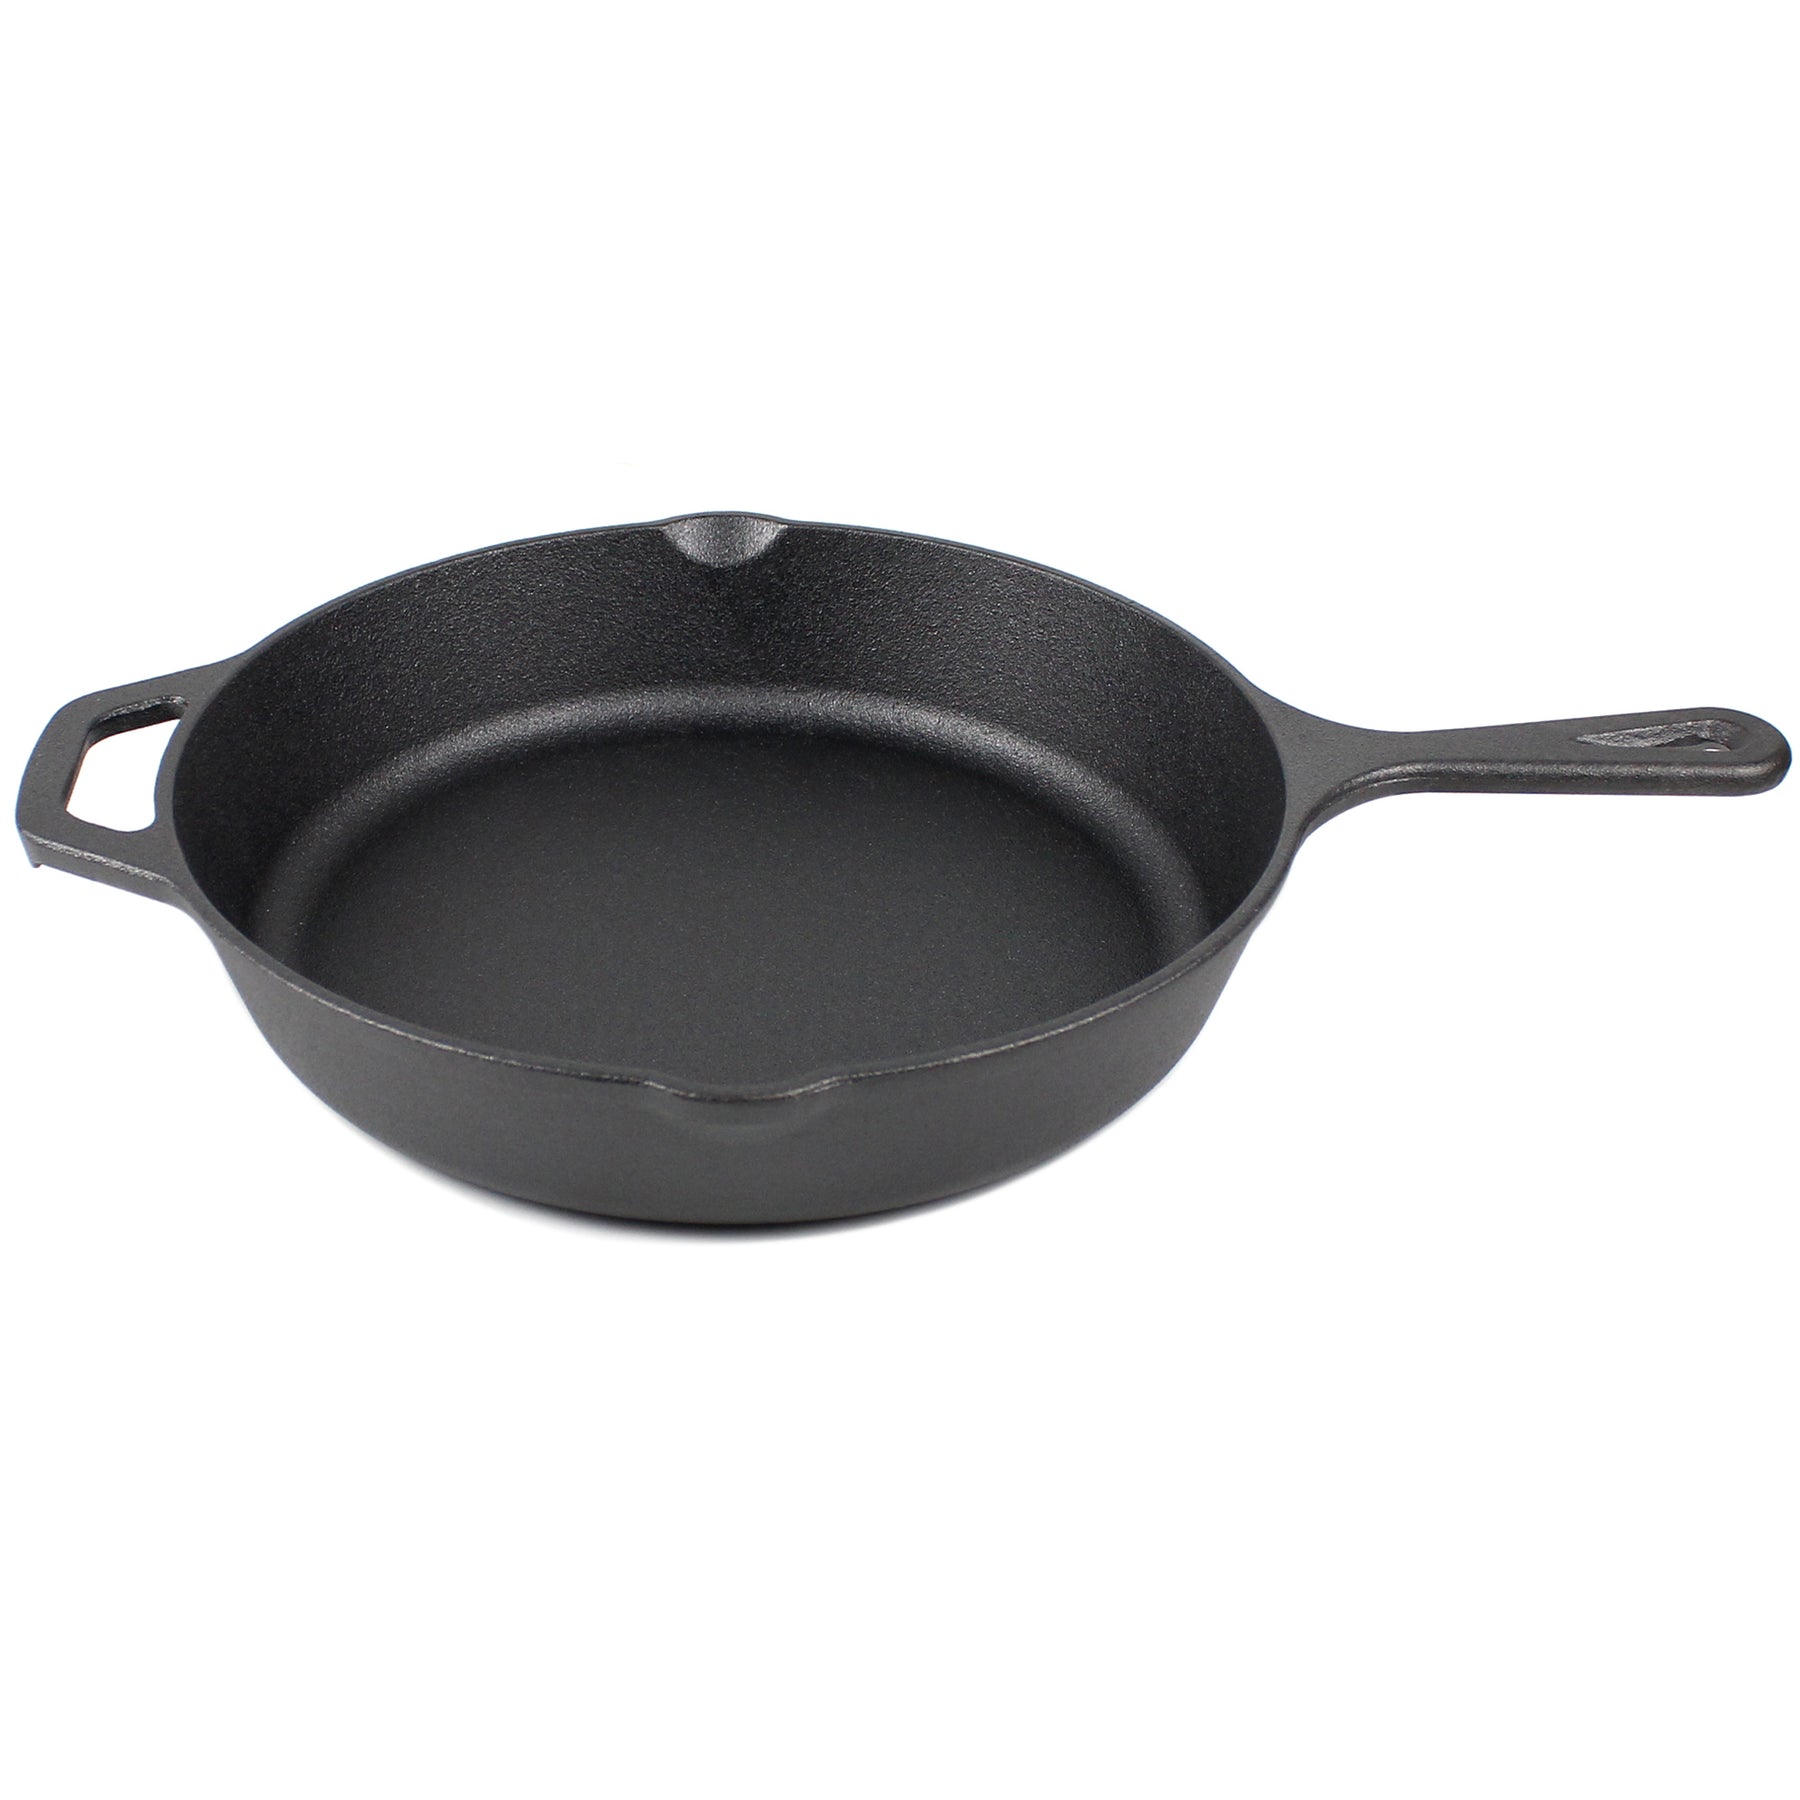 Crucible Cookware 10.25-Inch Cast Iron Skillet Set (Pre-Seasoned), Including Large & Assist Silicone Hot Handle Holders | Indoor & Outdoor Use